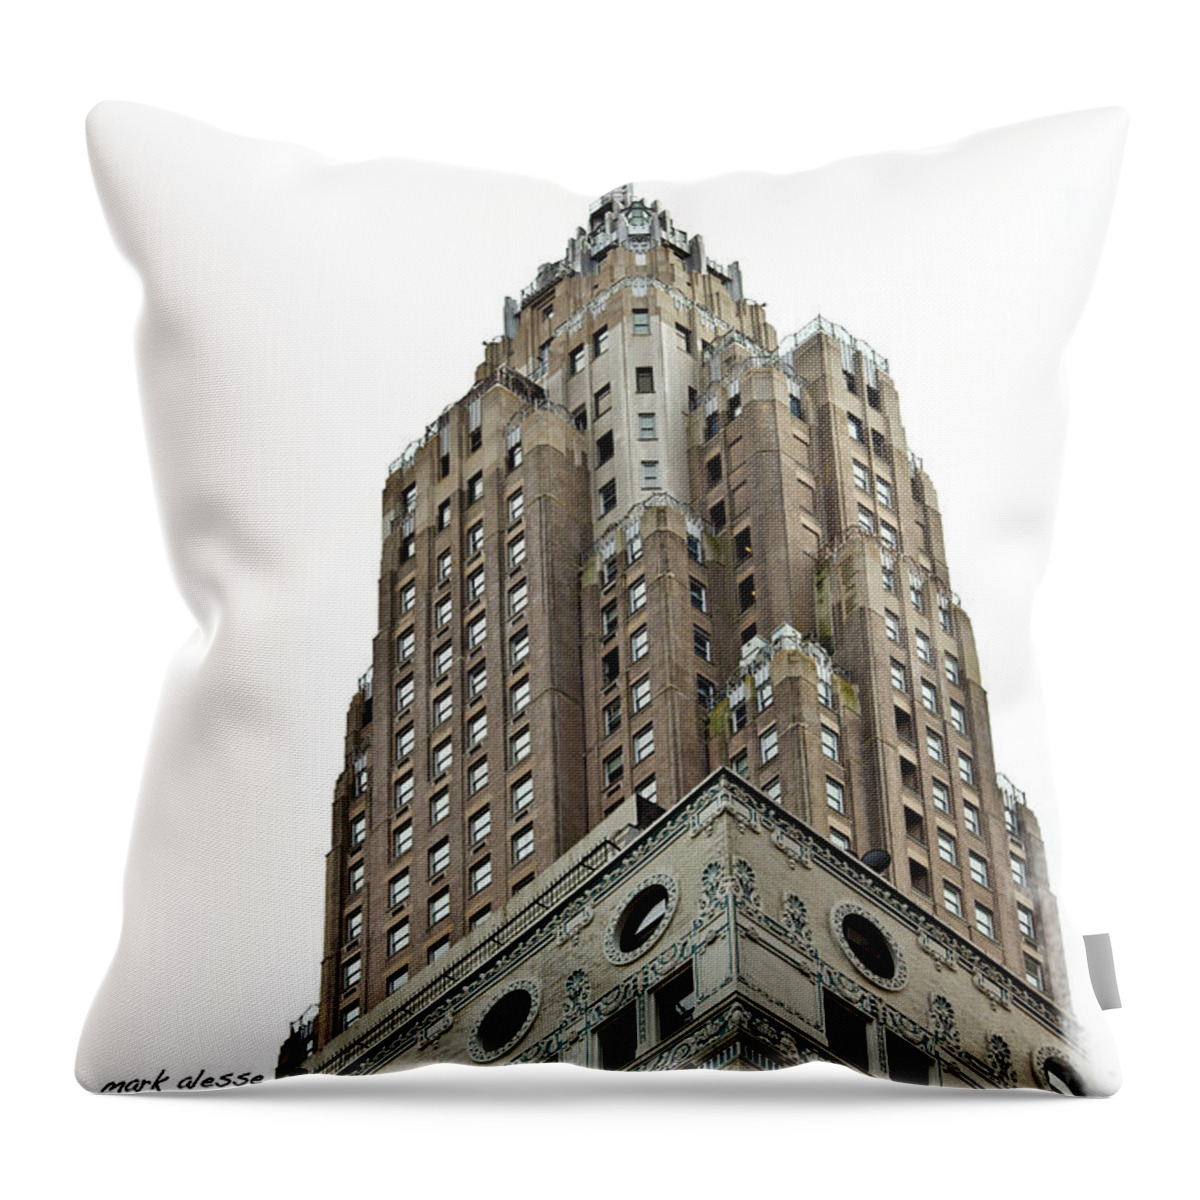  Throw Pillow featuring the photograph Towering by Mark Alesse